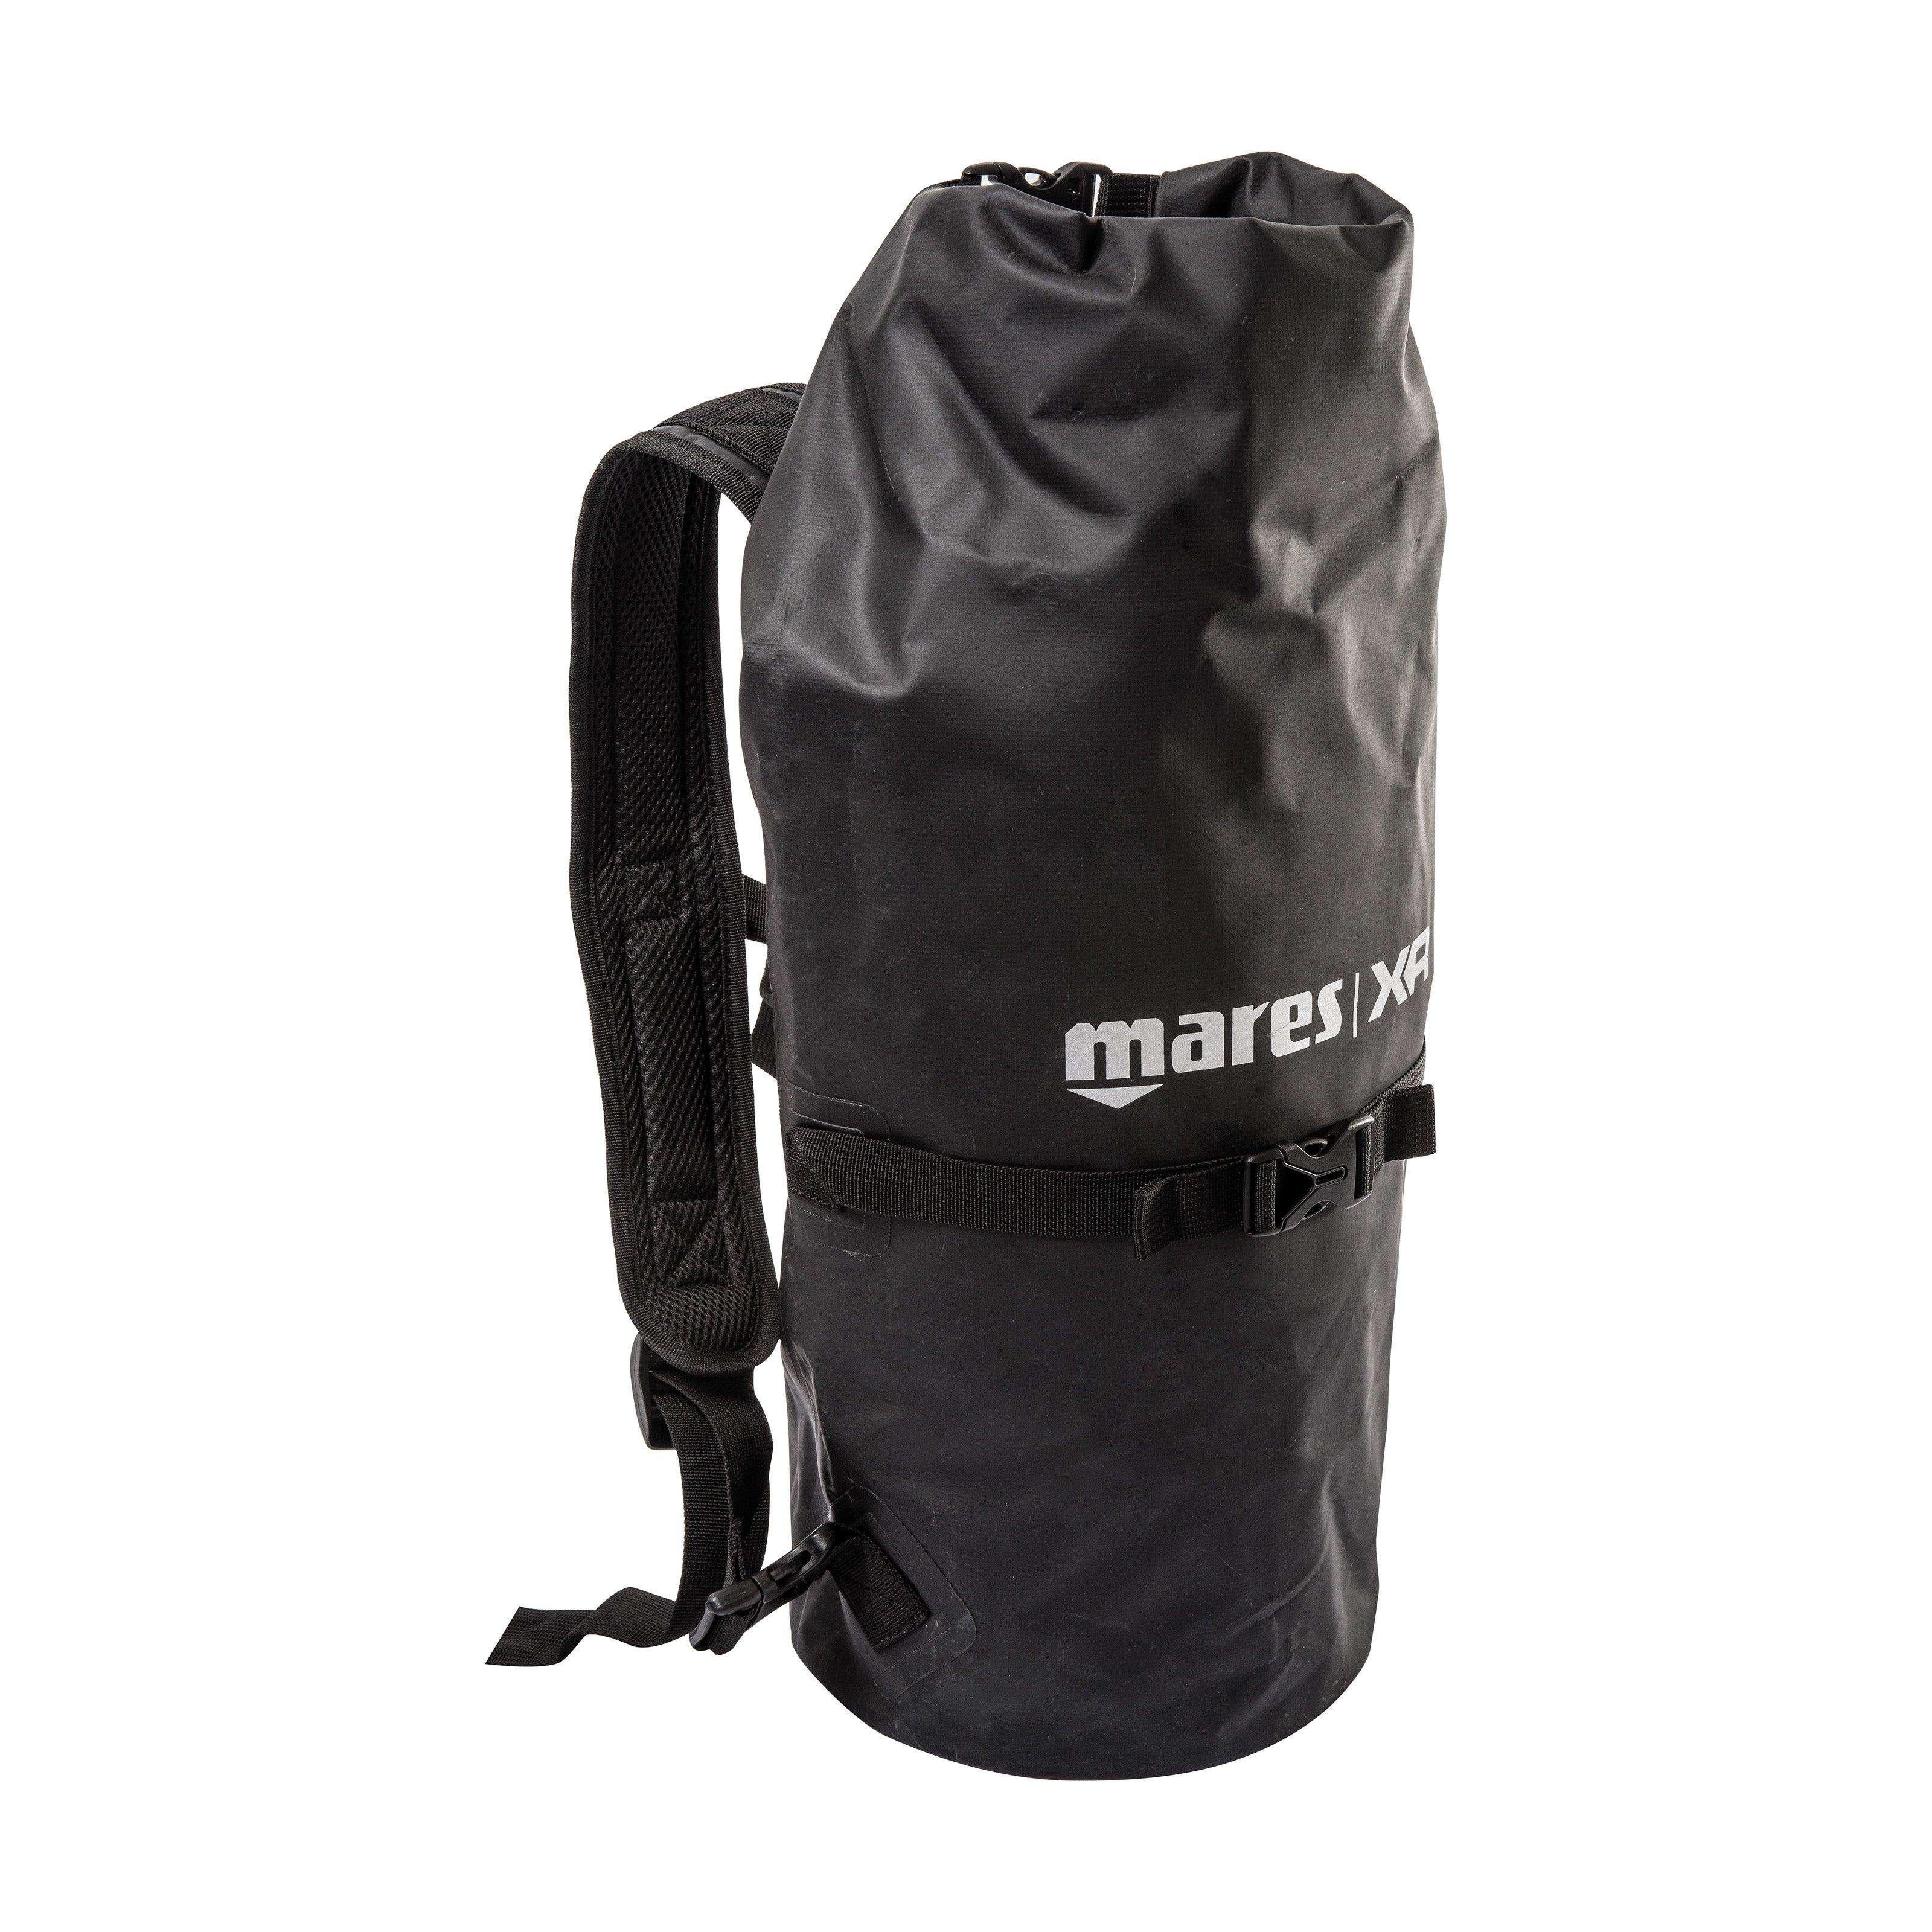 Mares DRY BAG 30L - WATERSPORTS24